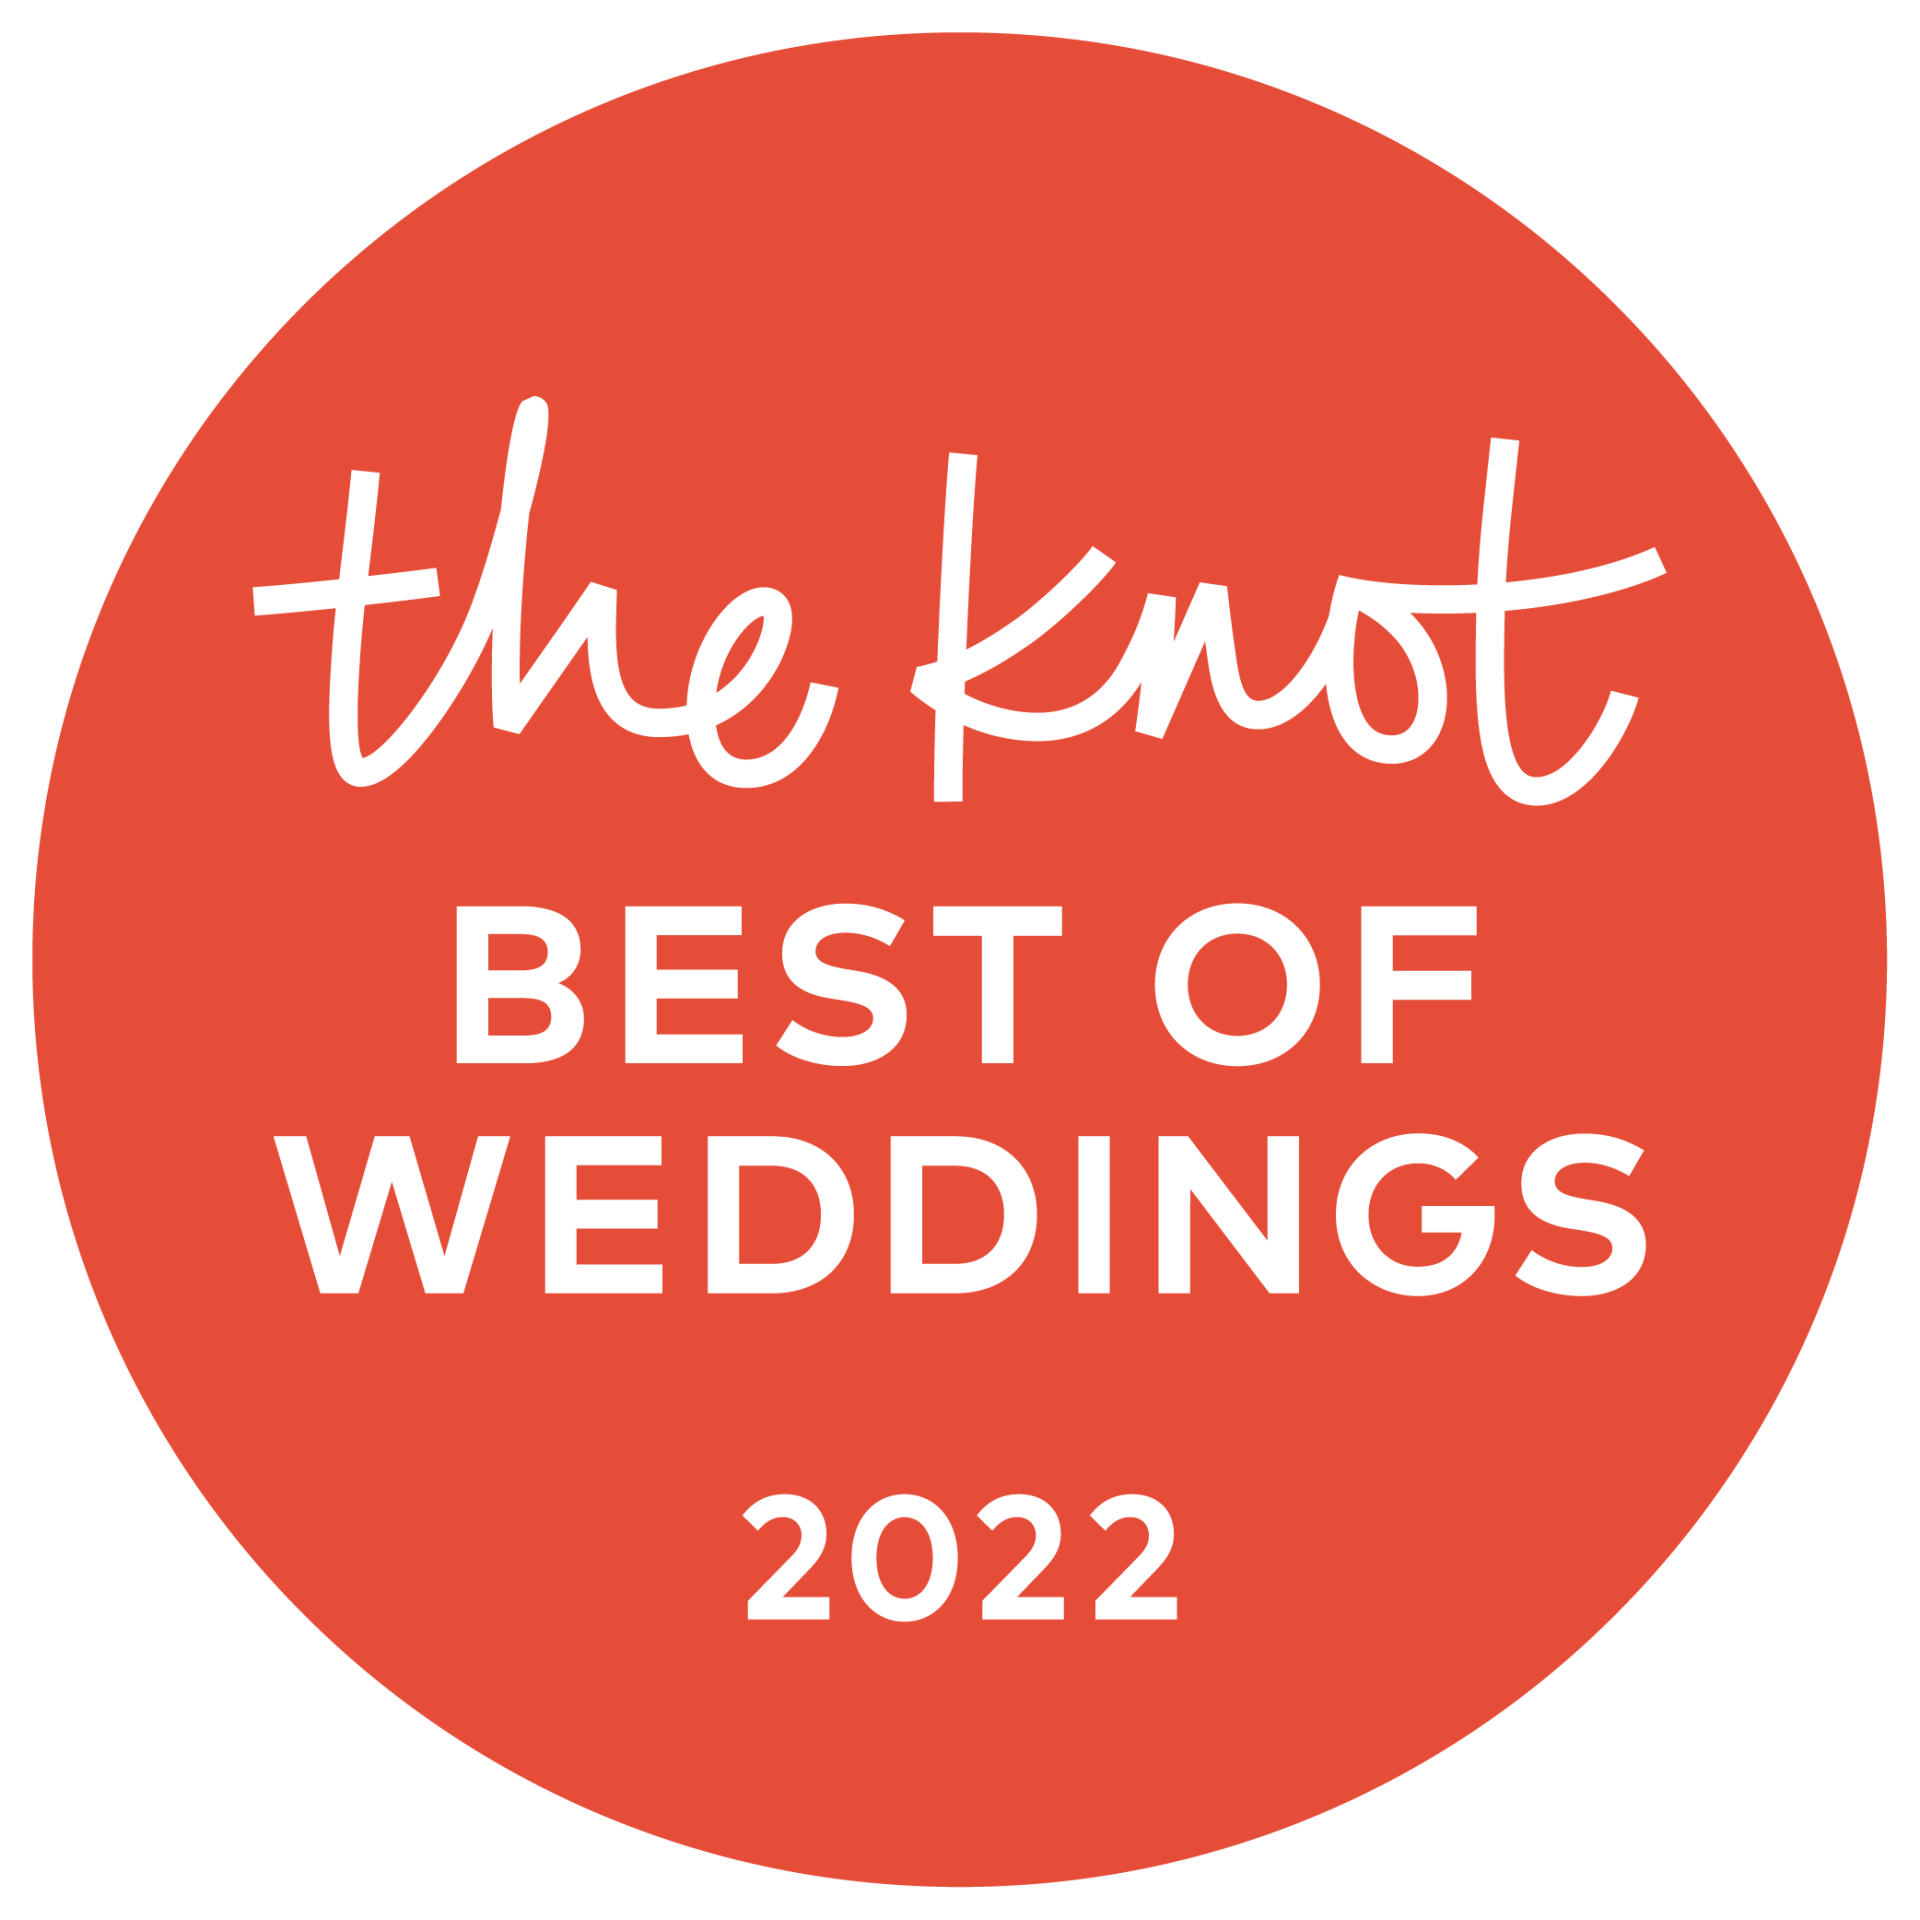 A to Z Party Rental is Honored to Announce our Couple’s Choice Awards from WeddingWire and The Knot again this year!